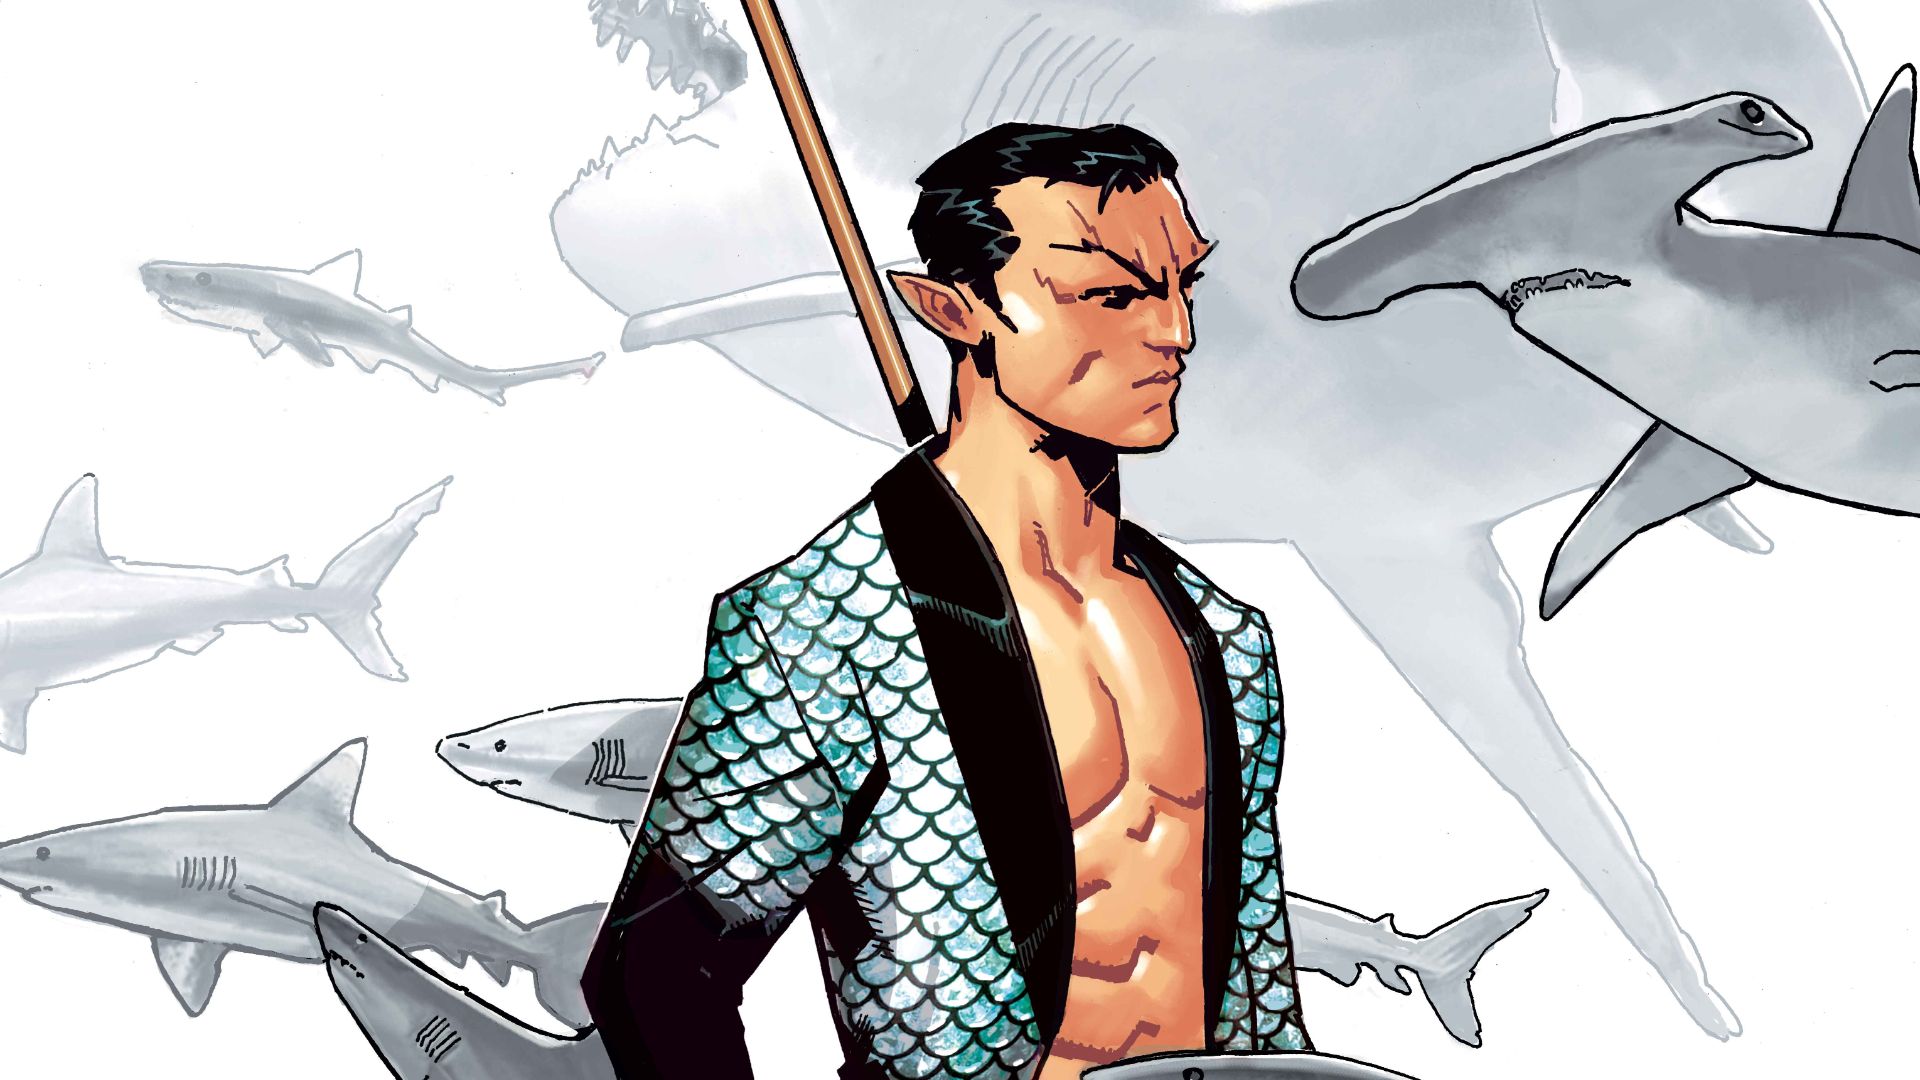 Shang-Chi and the Ten Rings #1 by Hellfire Gala variant cover by Chris Bachalo featuring Namor